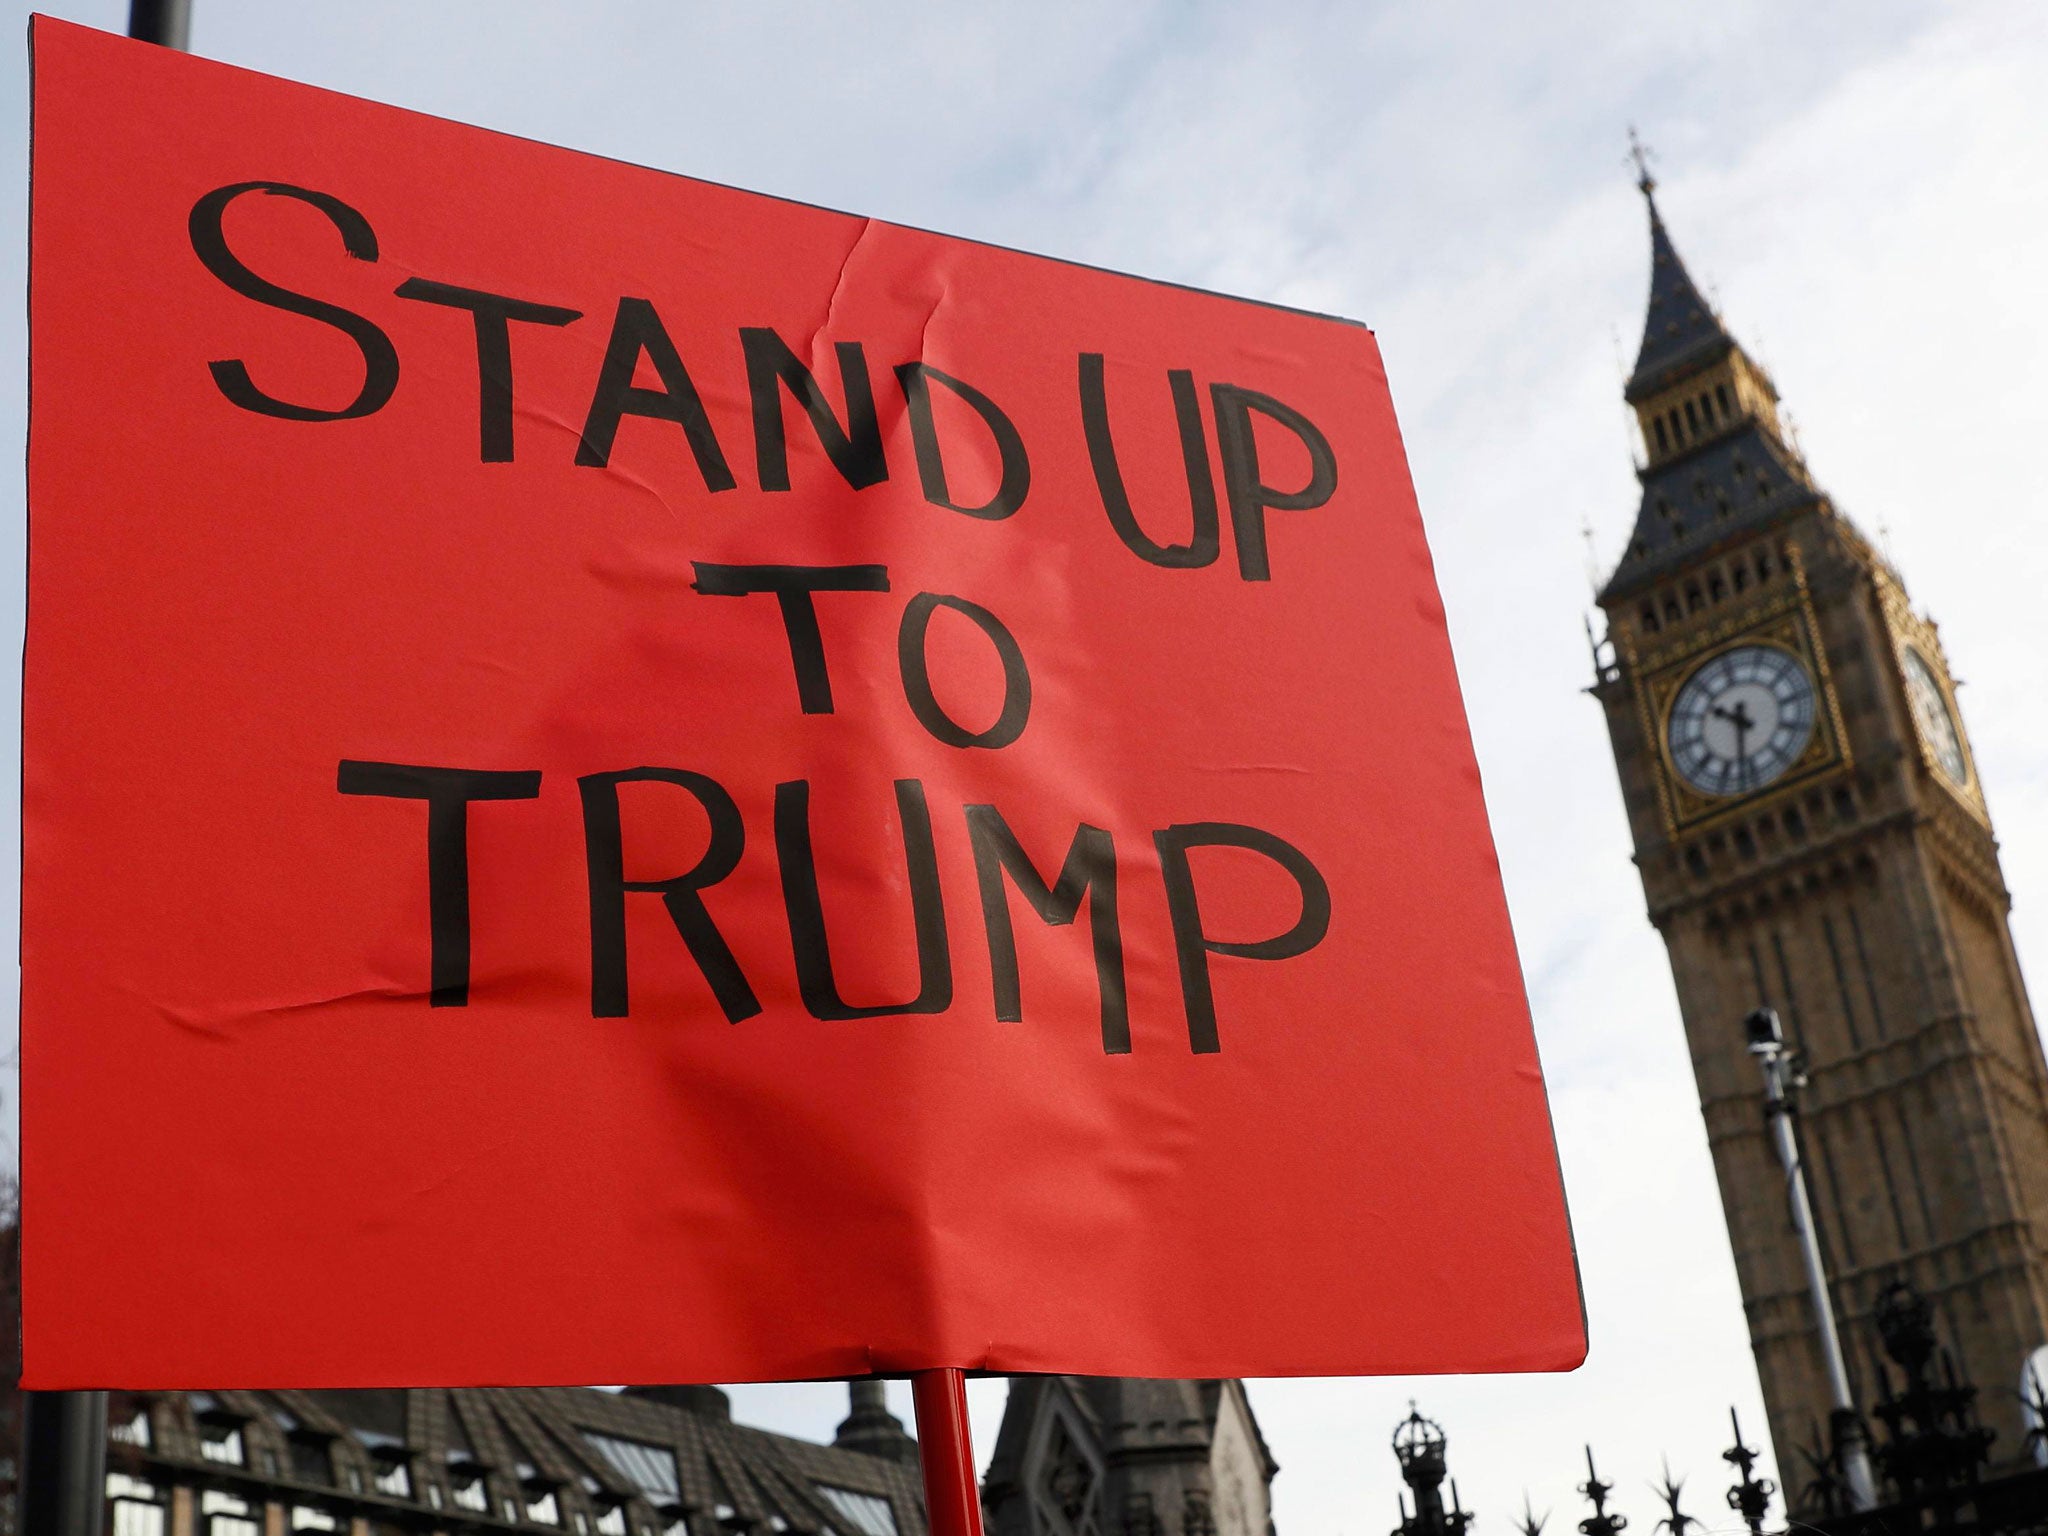 A demonstrator holds a banner that reads "Stand Up To Trump" outside The Houses of Parliament